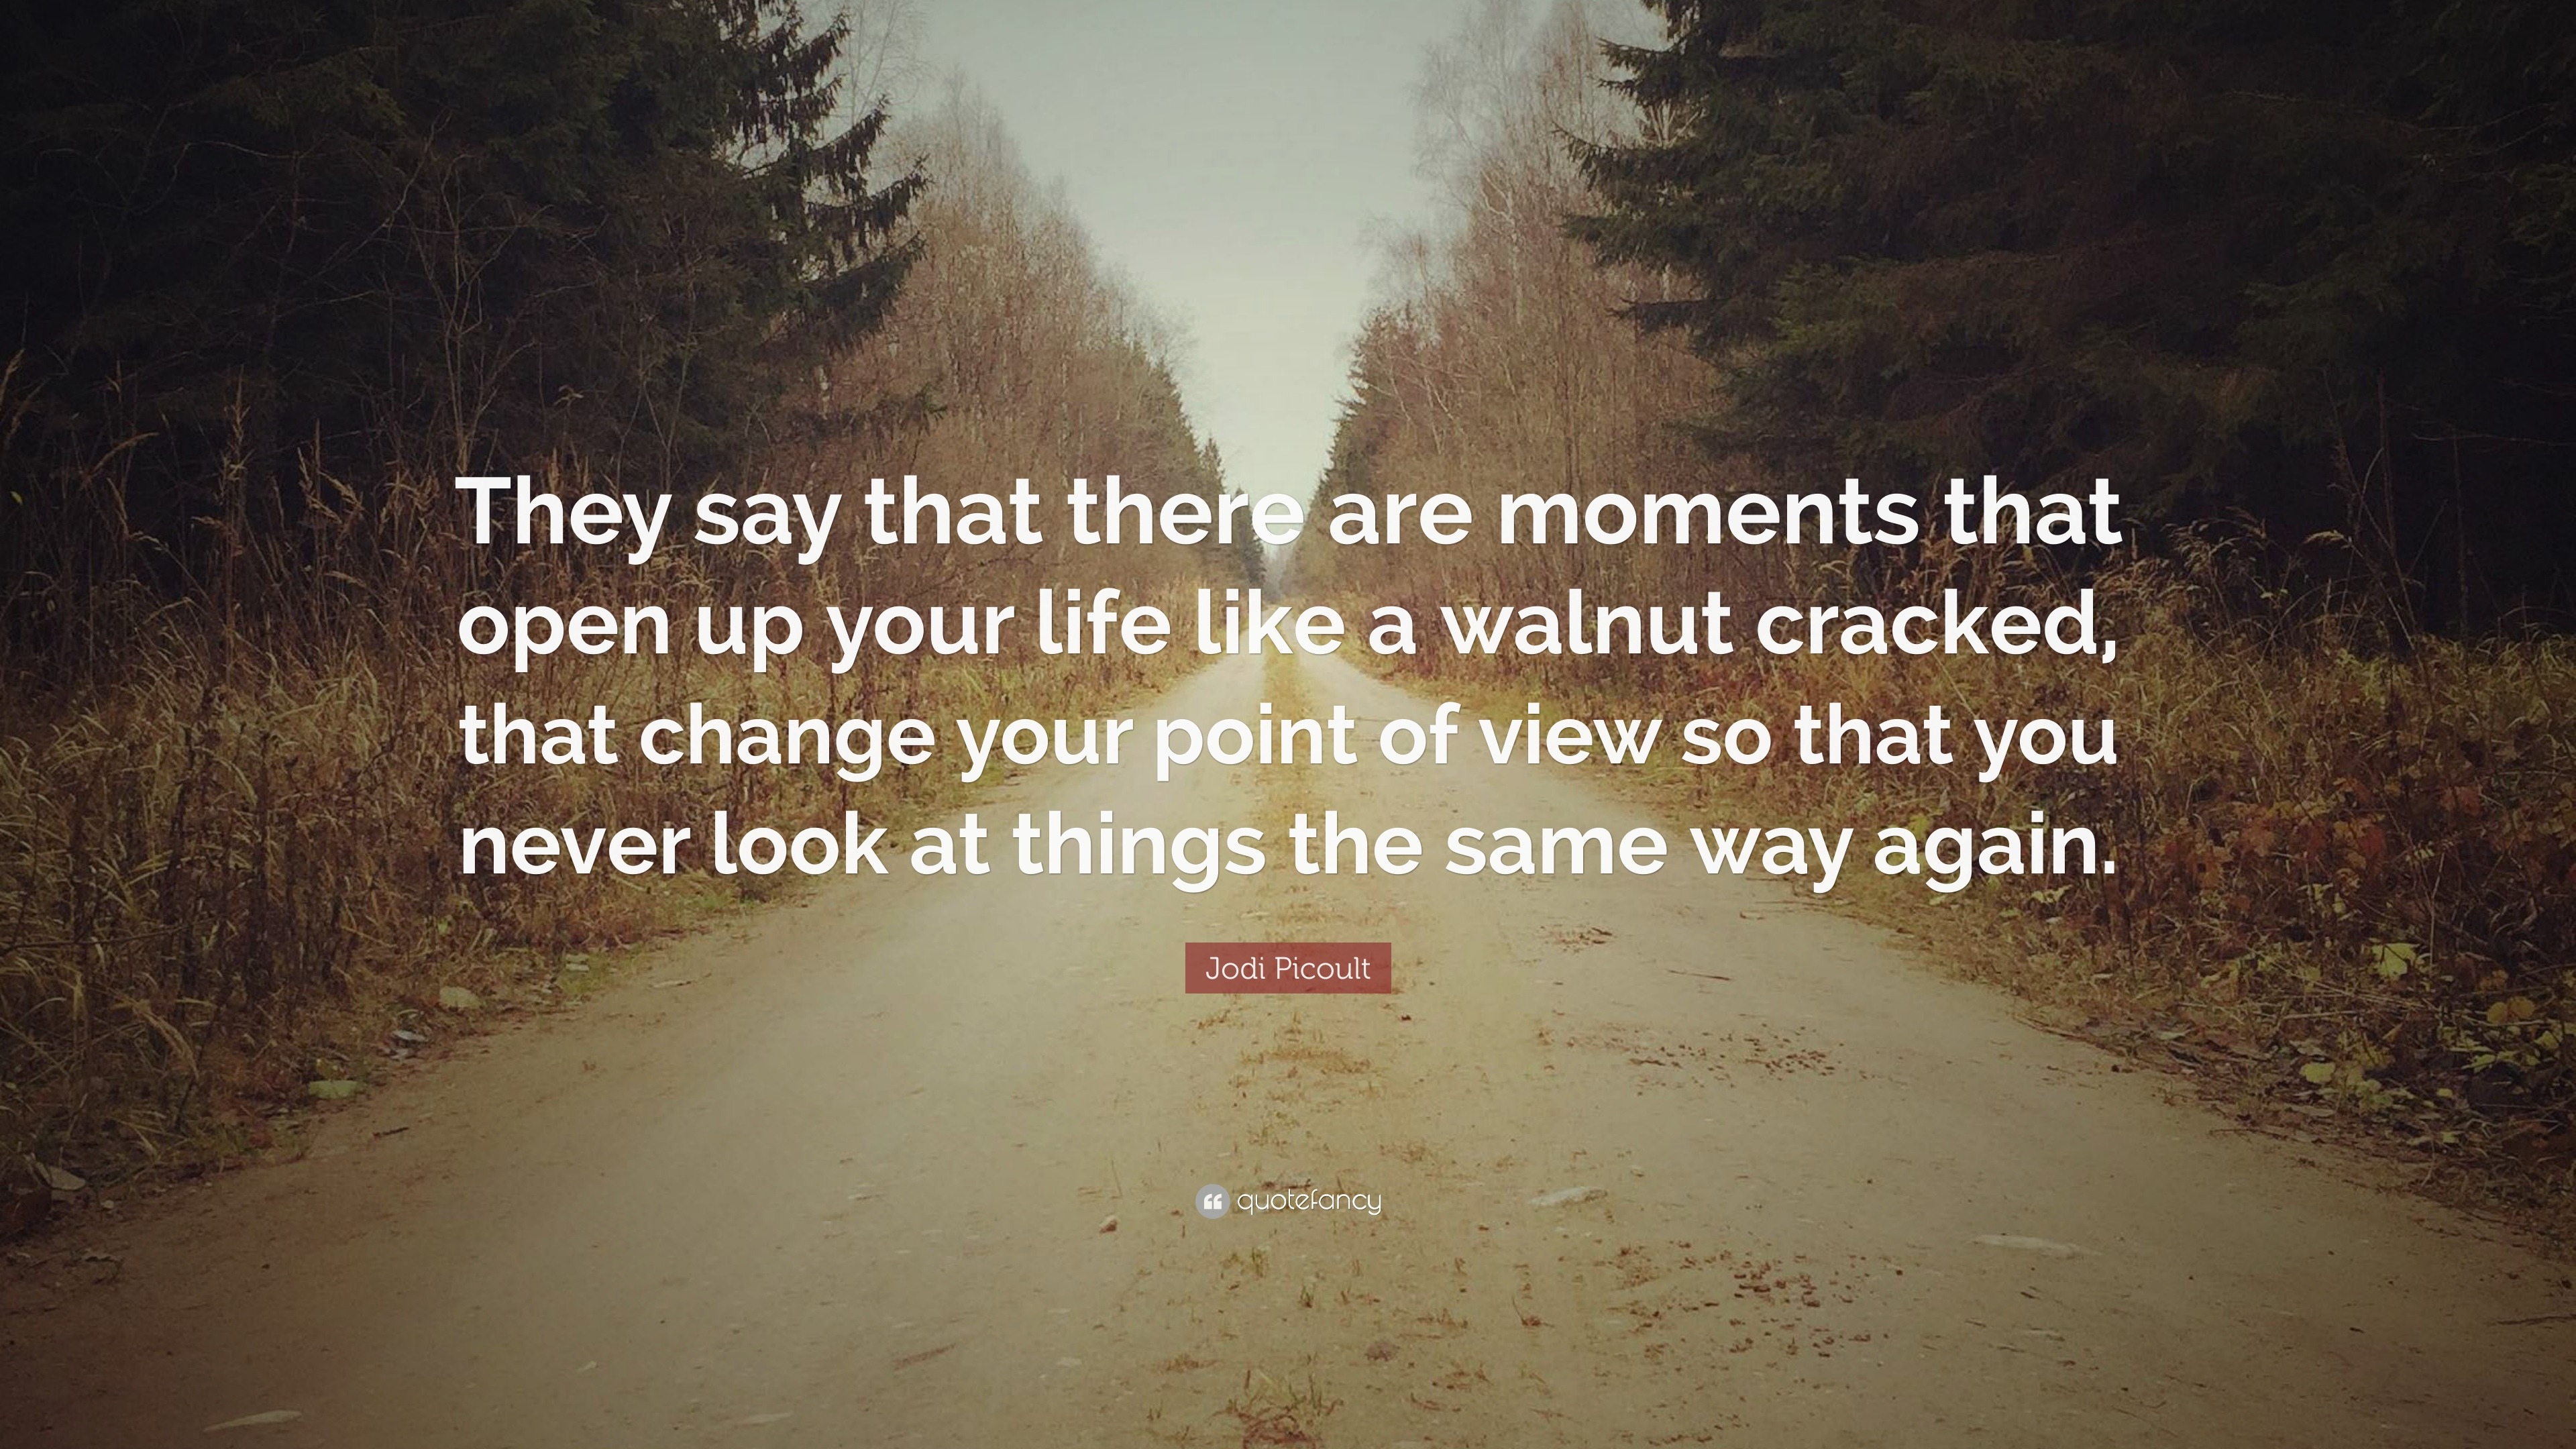 Jodi Picoult Quote “They say that there are moments that open up your life